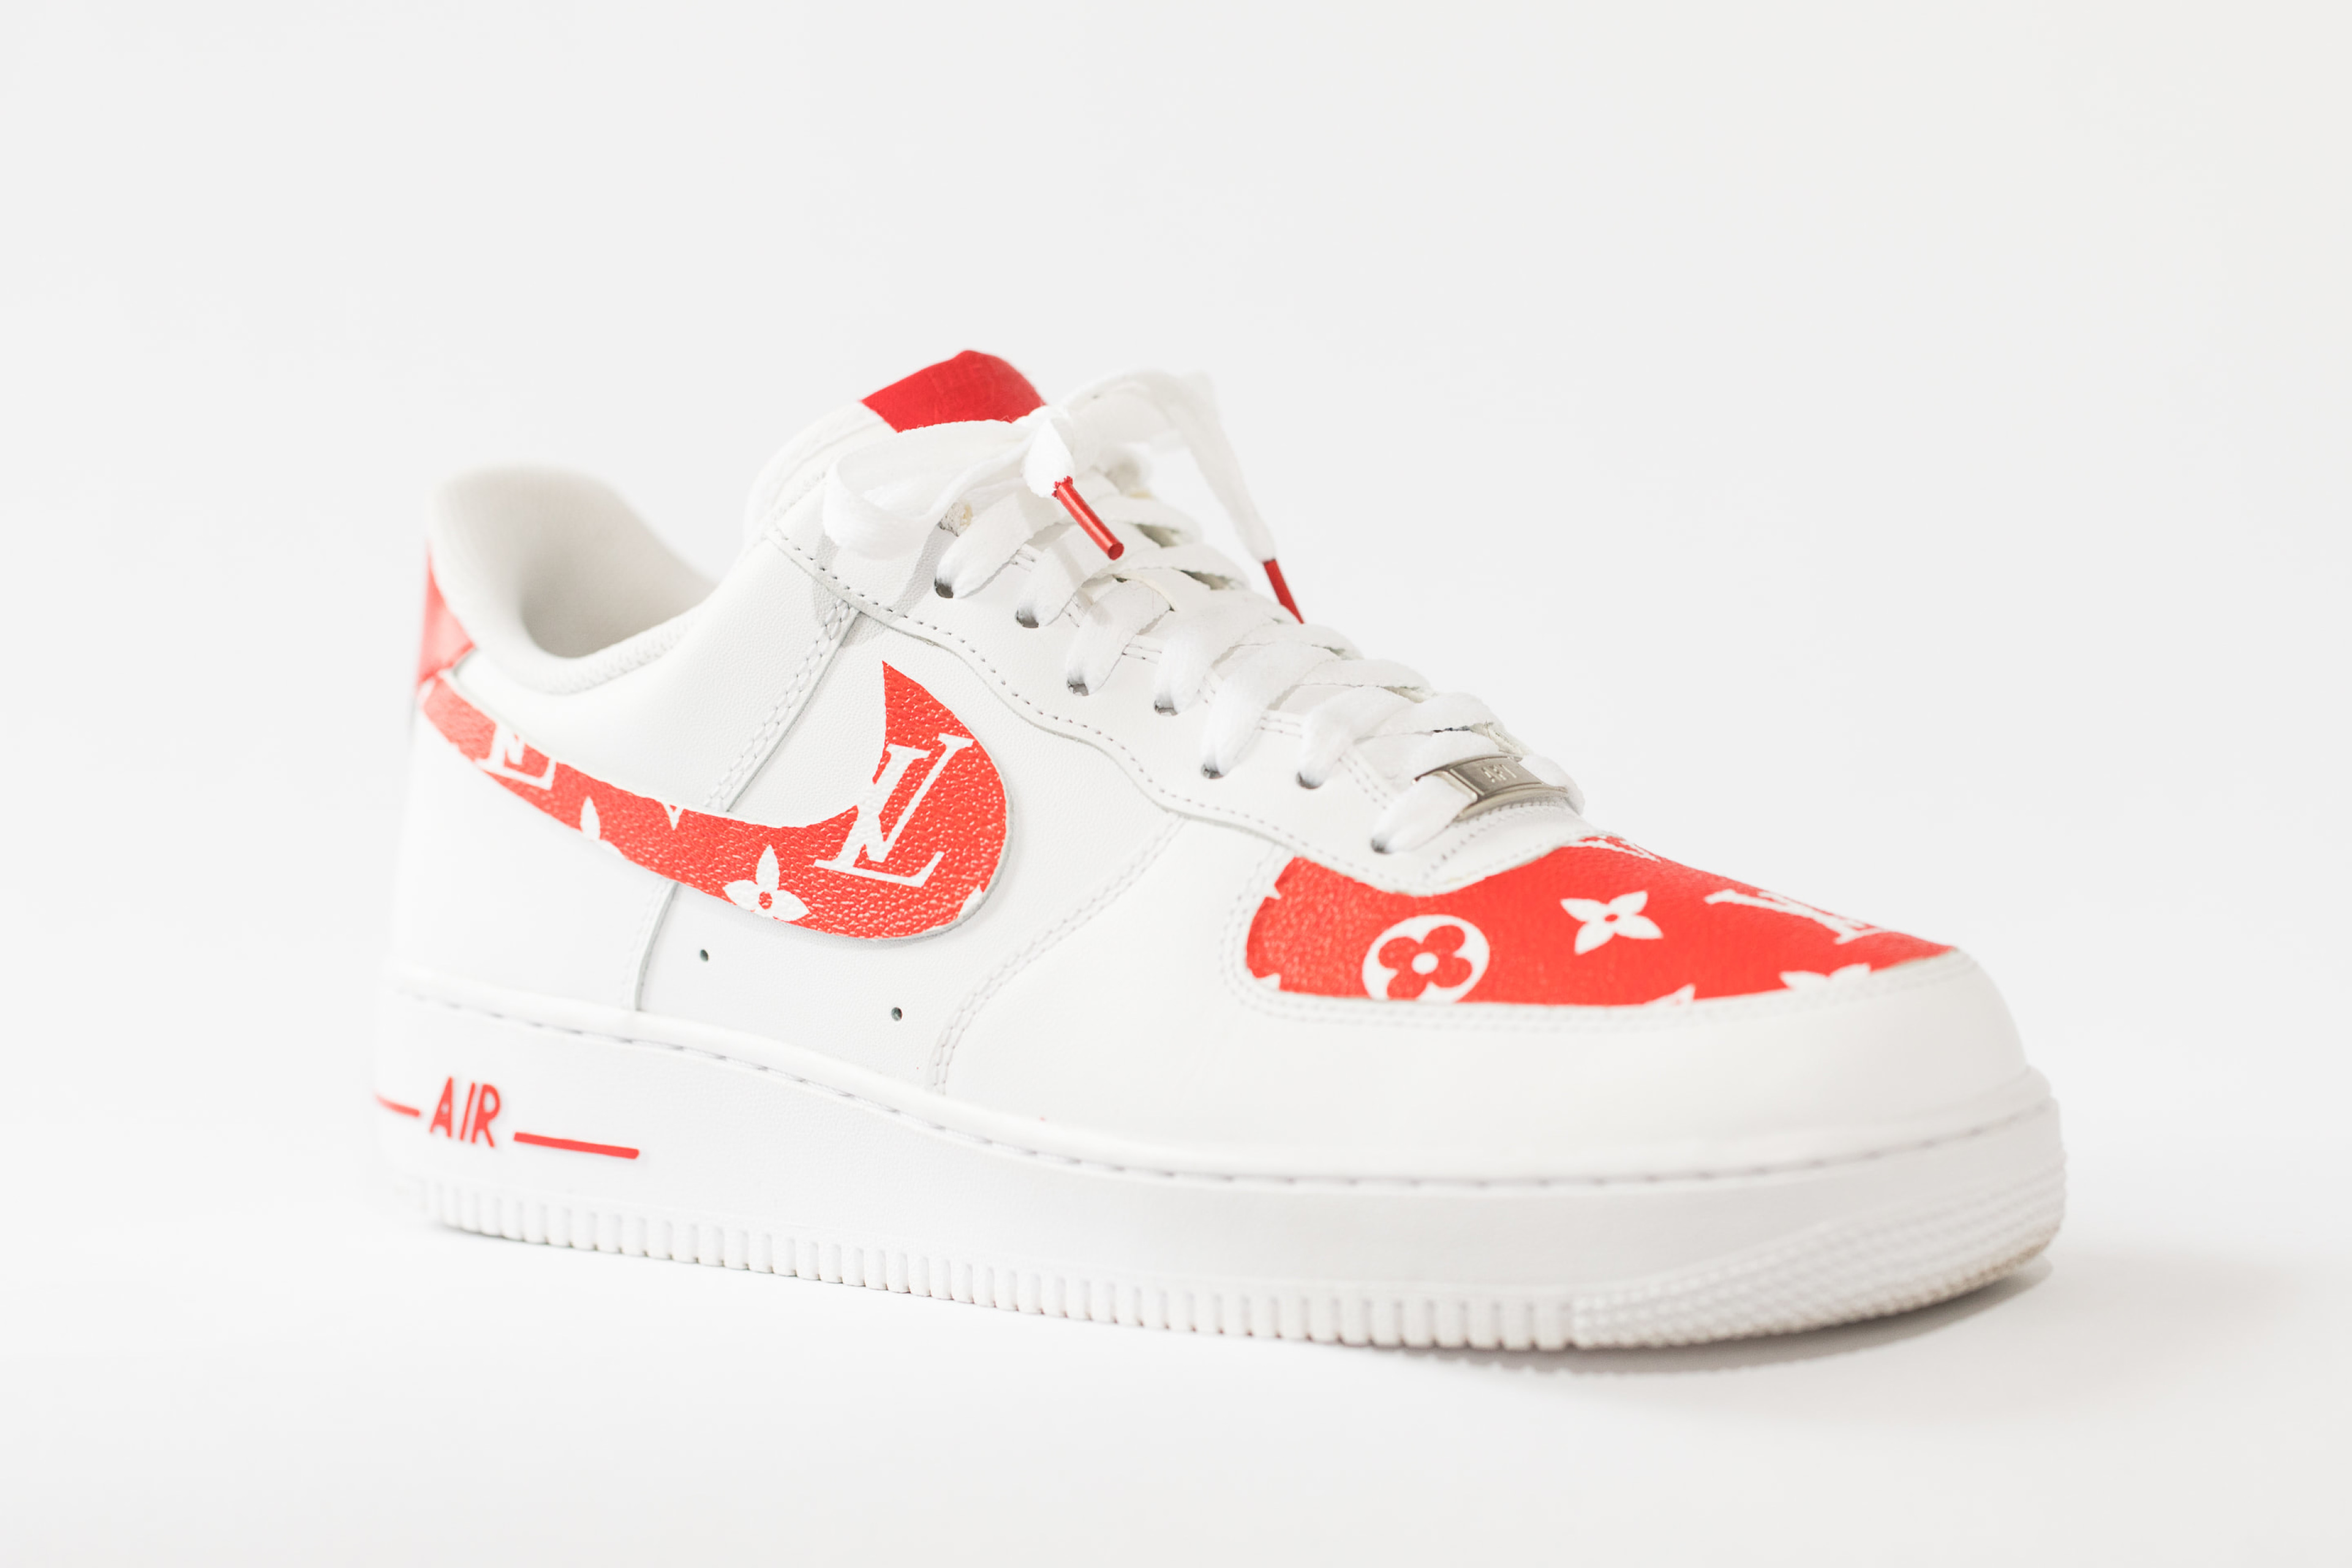 Nike Air Force 1 all white low 'Lous Vutton x SUPREME Red